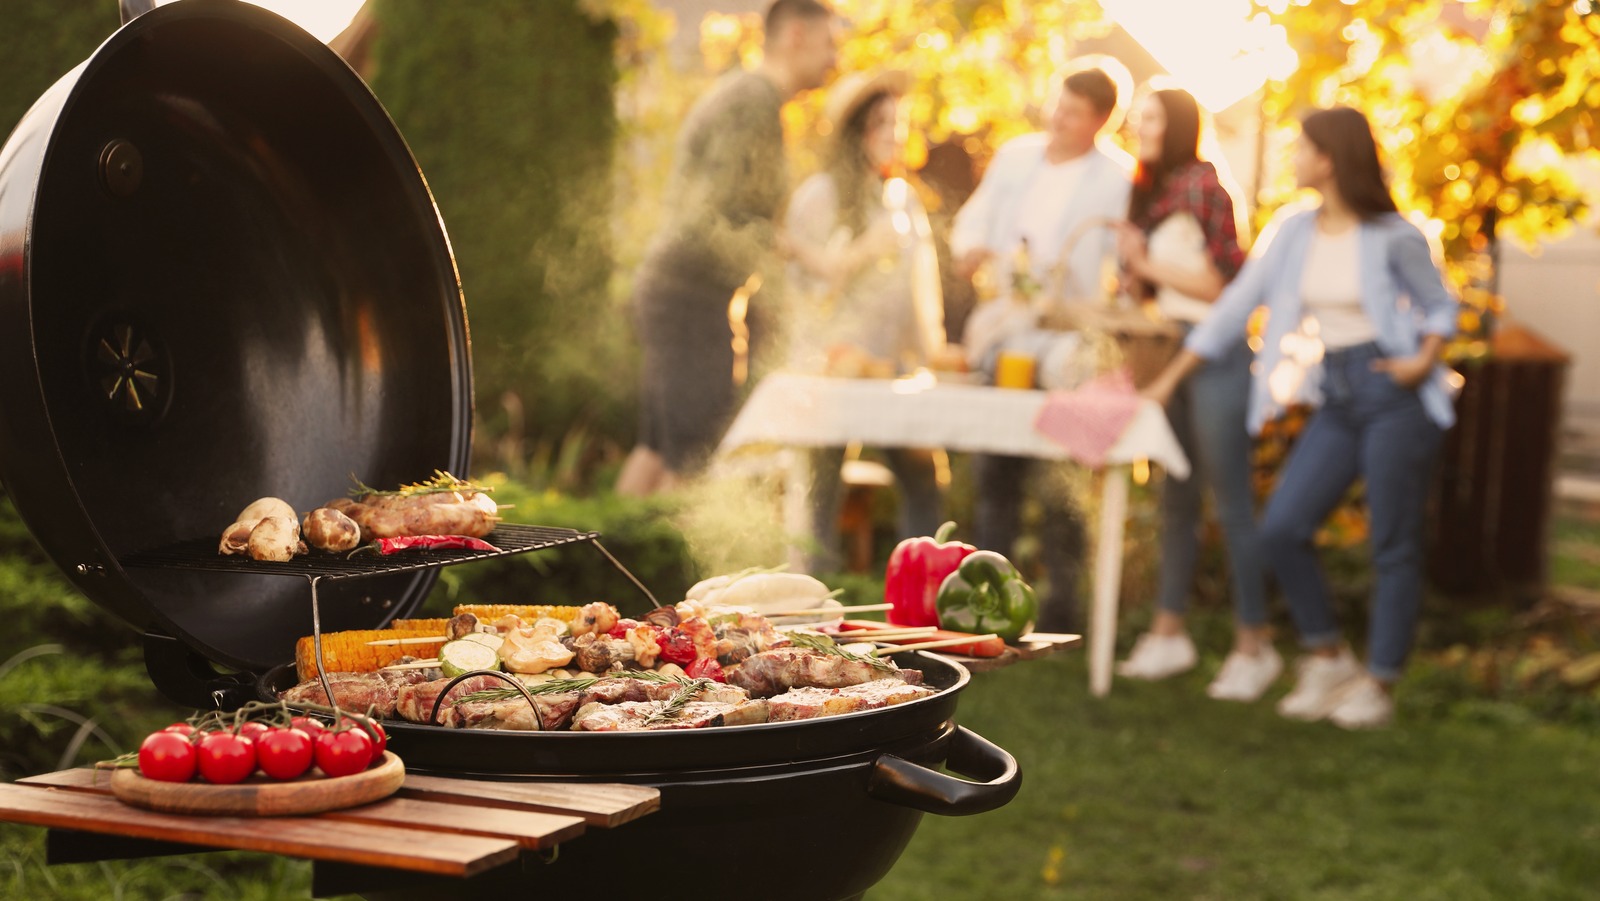 What Are Your Summer BBQ Must Haves?